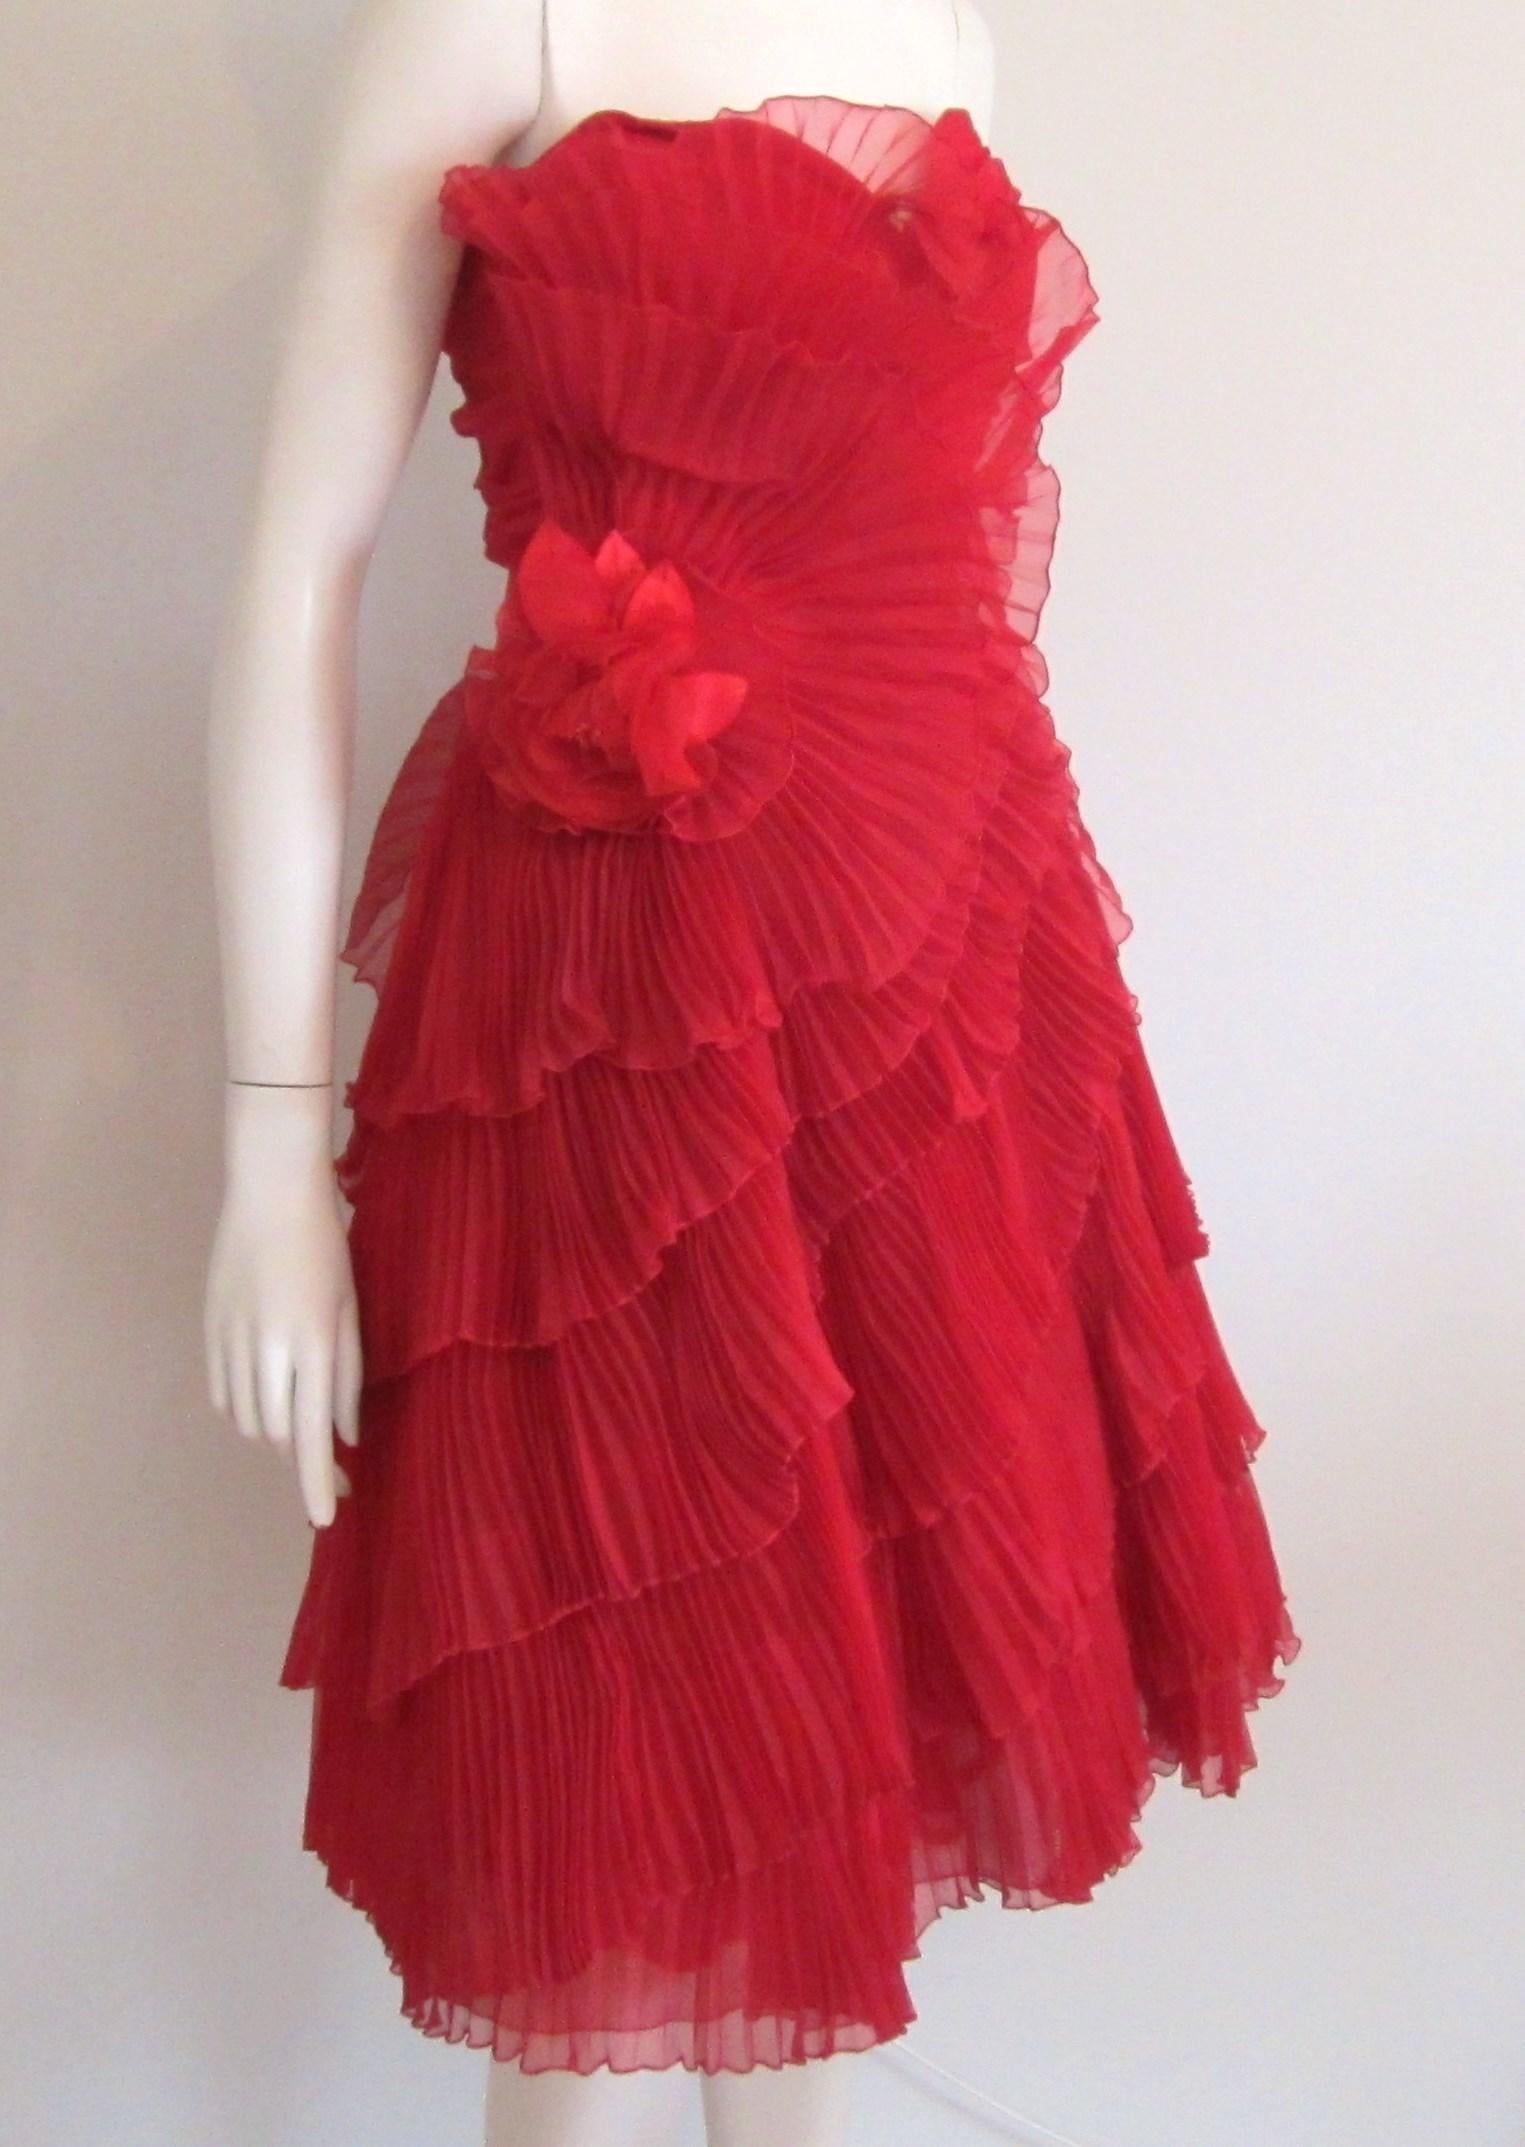 Red Hot Strapless Accordion Pleated 1950s Strapless Dress. Sweet Heart bodice. Layers and Layers of accordion pleating! Large floral adornment. Side zipper and clip closure. Belt closure on the side. Boned Bodice. Tulle underskirt as well as a lace